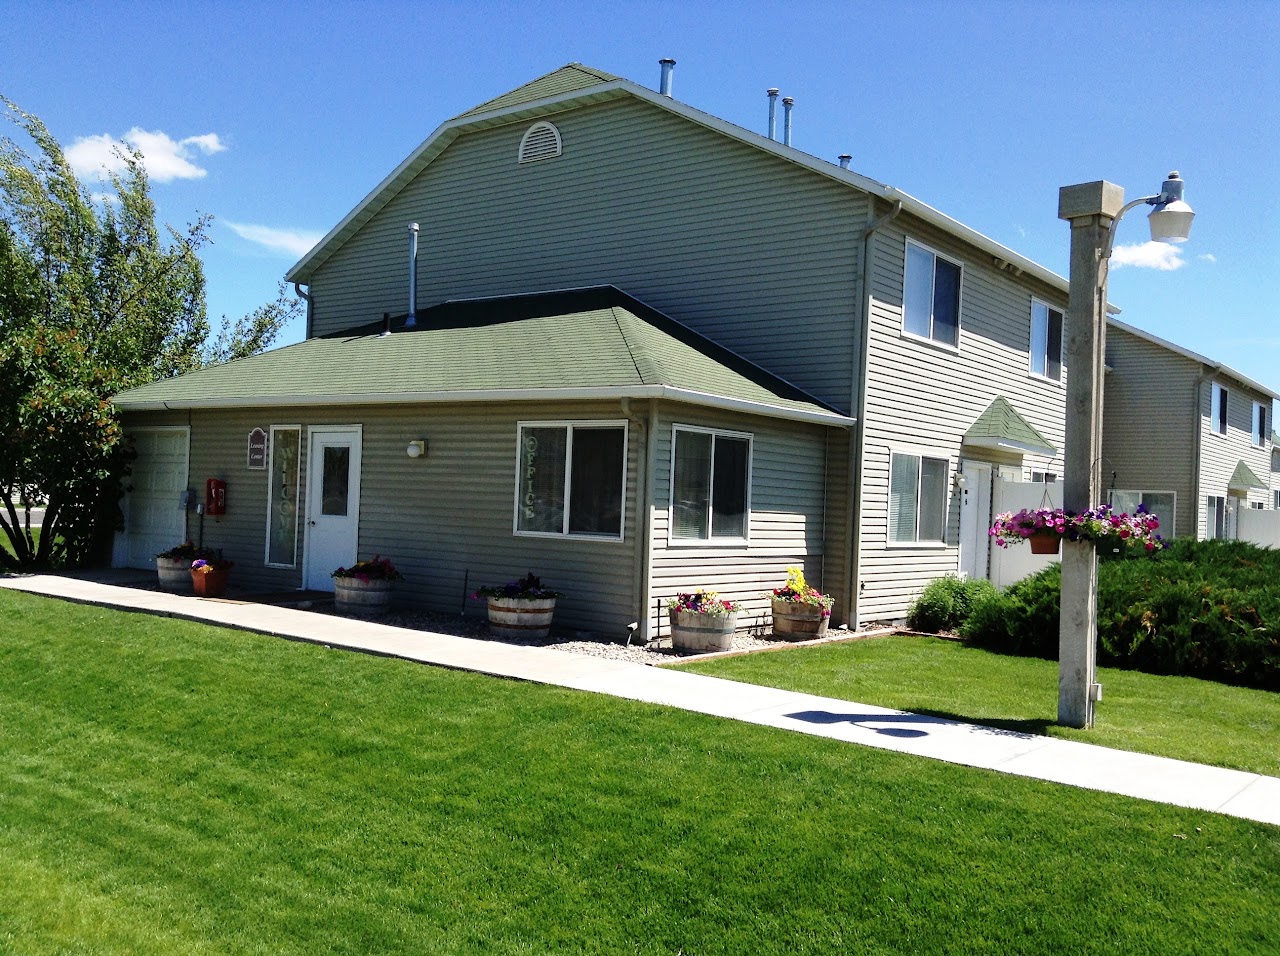 Photo of DONEGAL. Affordable housing located at 455 WEST 5TH SOUTH REXBURG, ID 83440